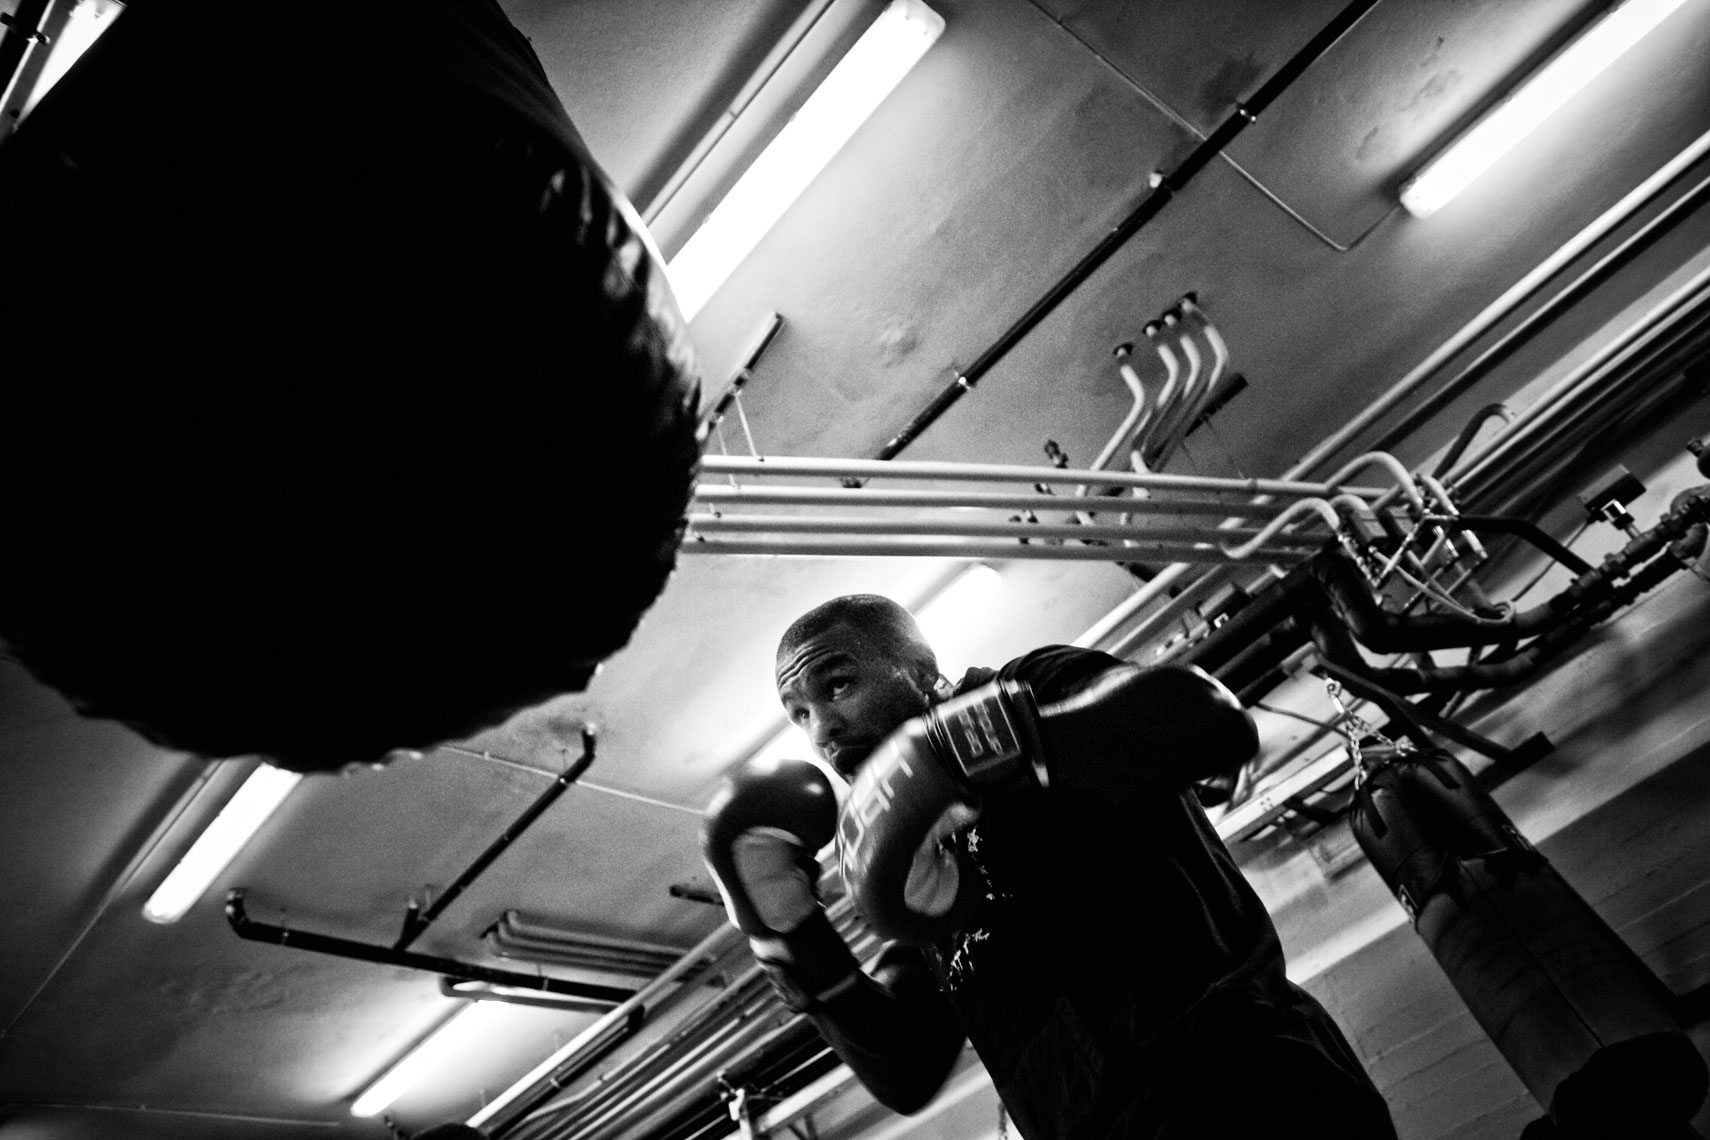 ITALY. Florence, 28th October 2011. Leonard Bundu during the training  in preparation of the match for the EBU (European Boxing Union) Welter Weight crown.